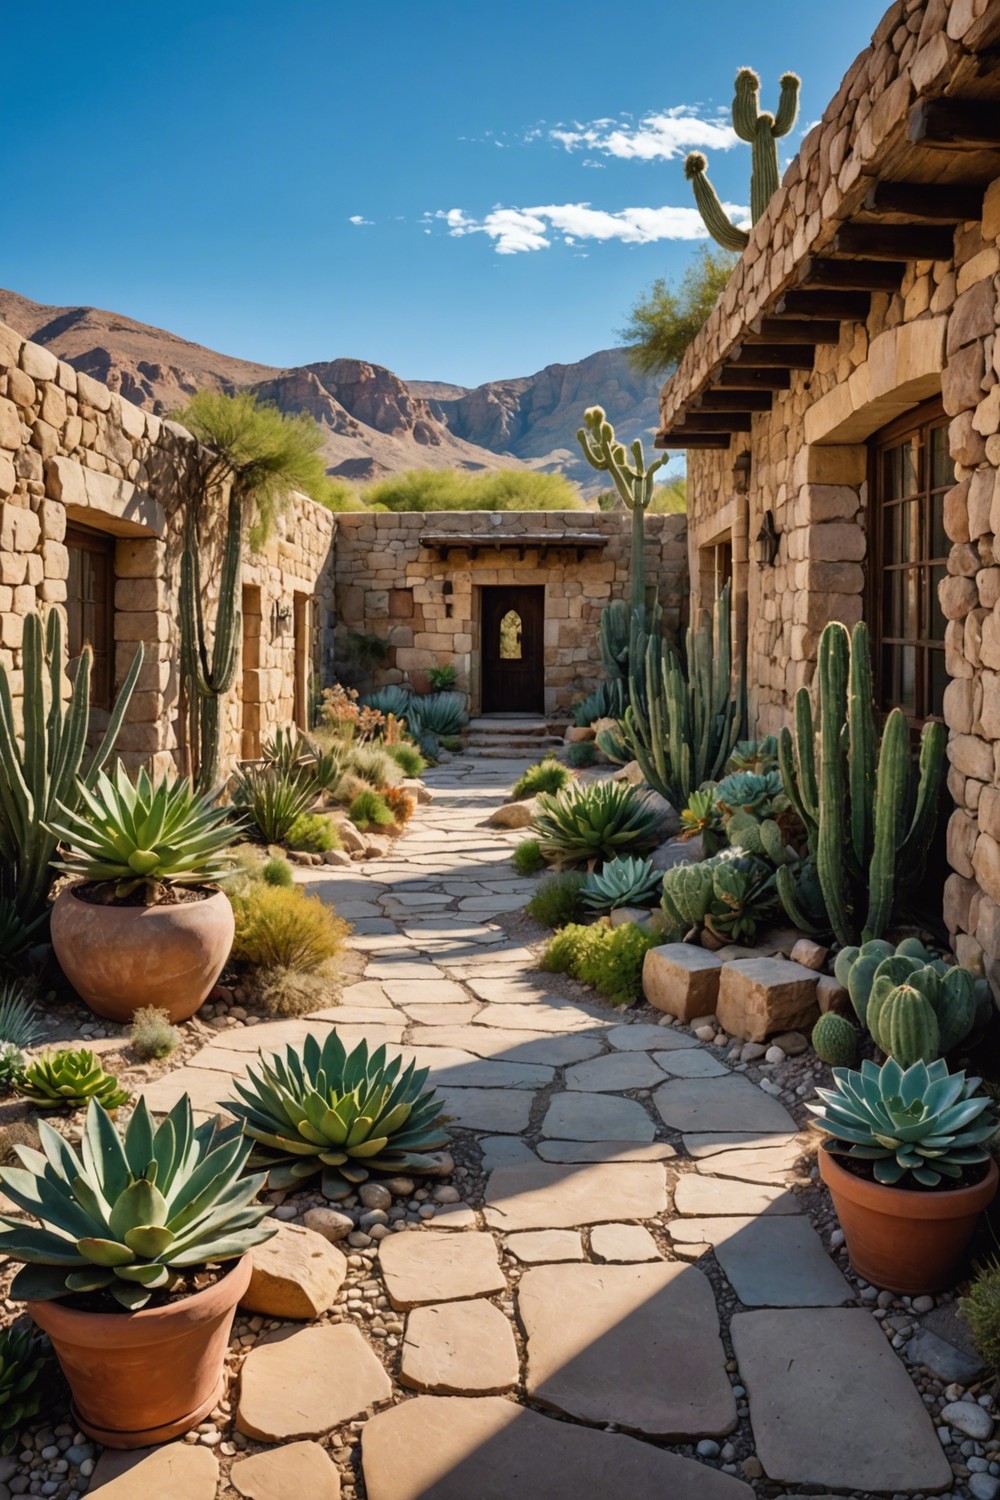 Create a Secluded Oasis with Desert Plants and Walls